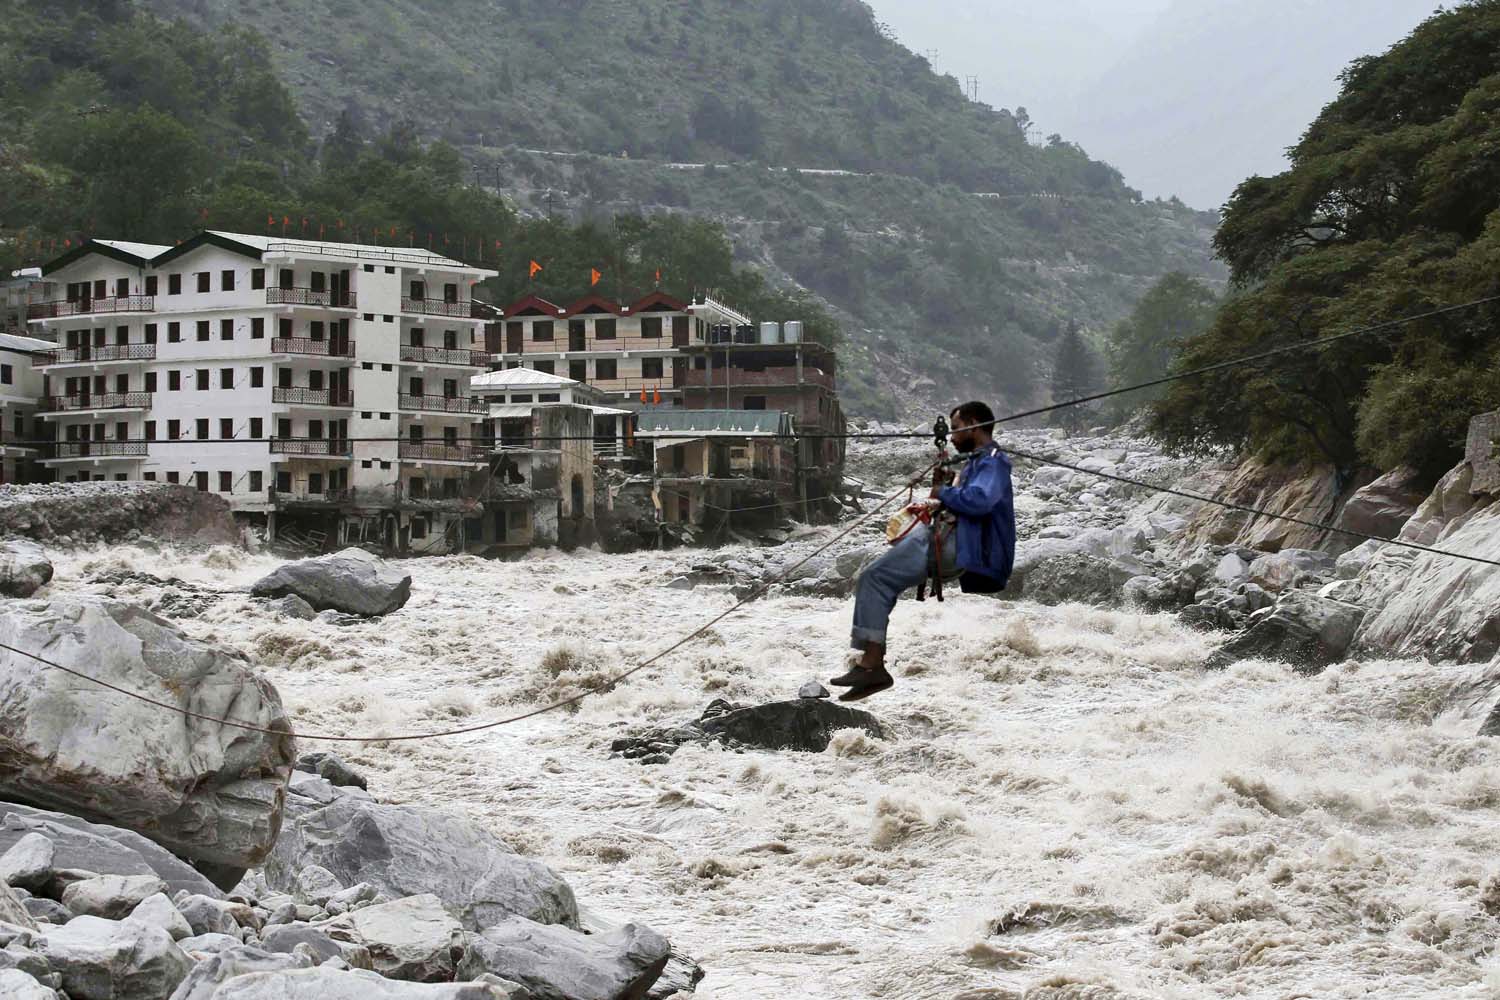 June 23, 2013. An Indian man crosses over a swollen river with the help of a rope in Govindghat, India.